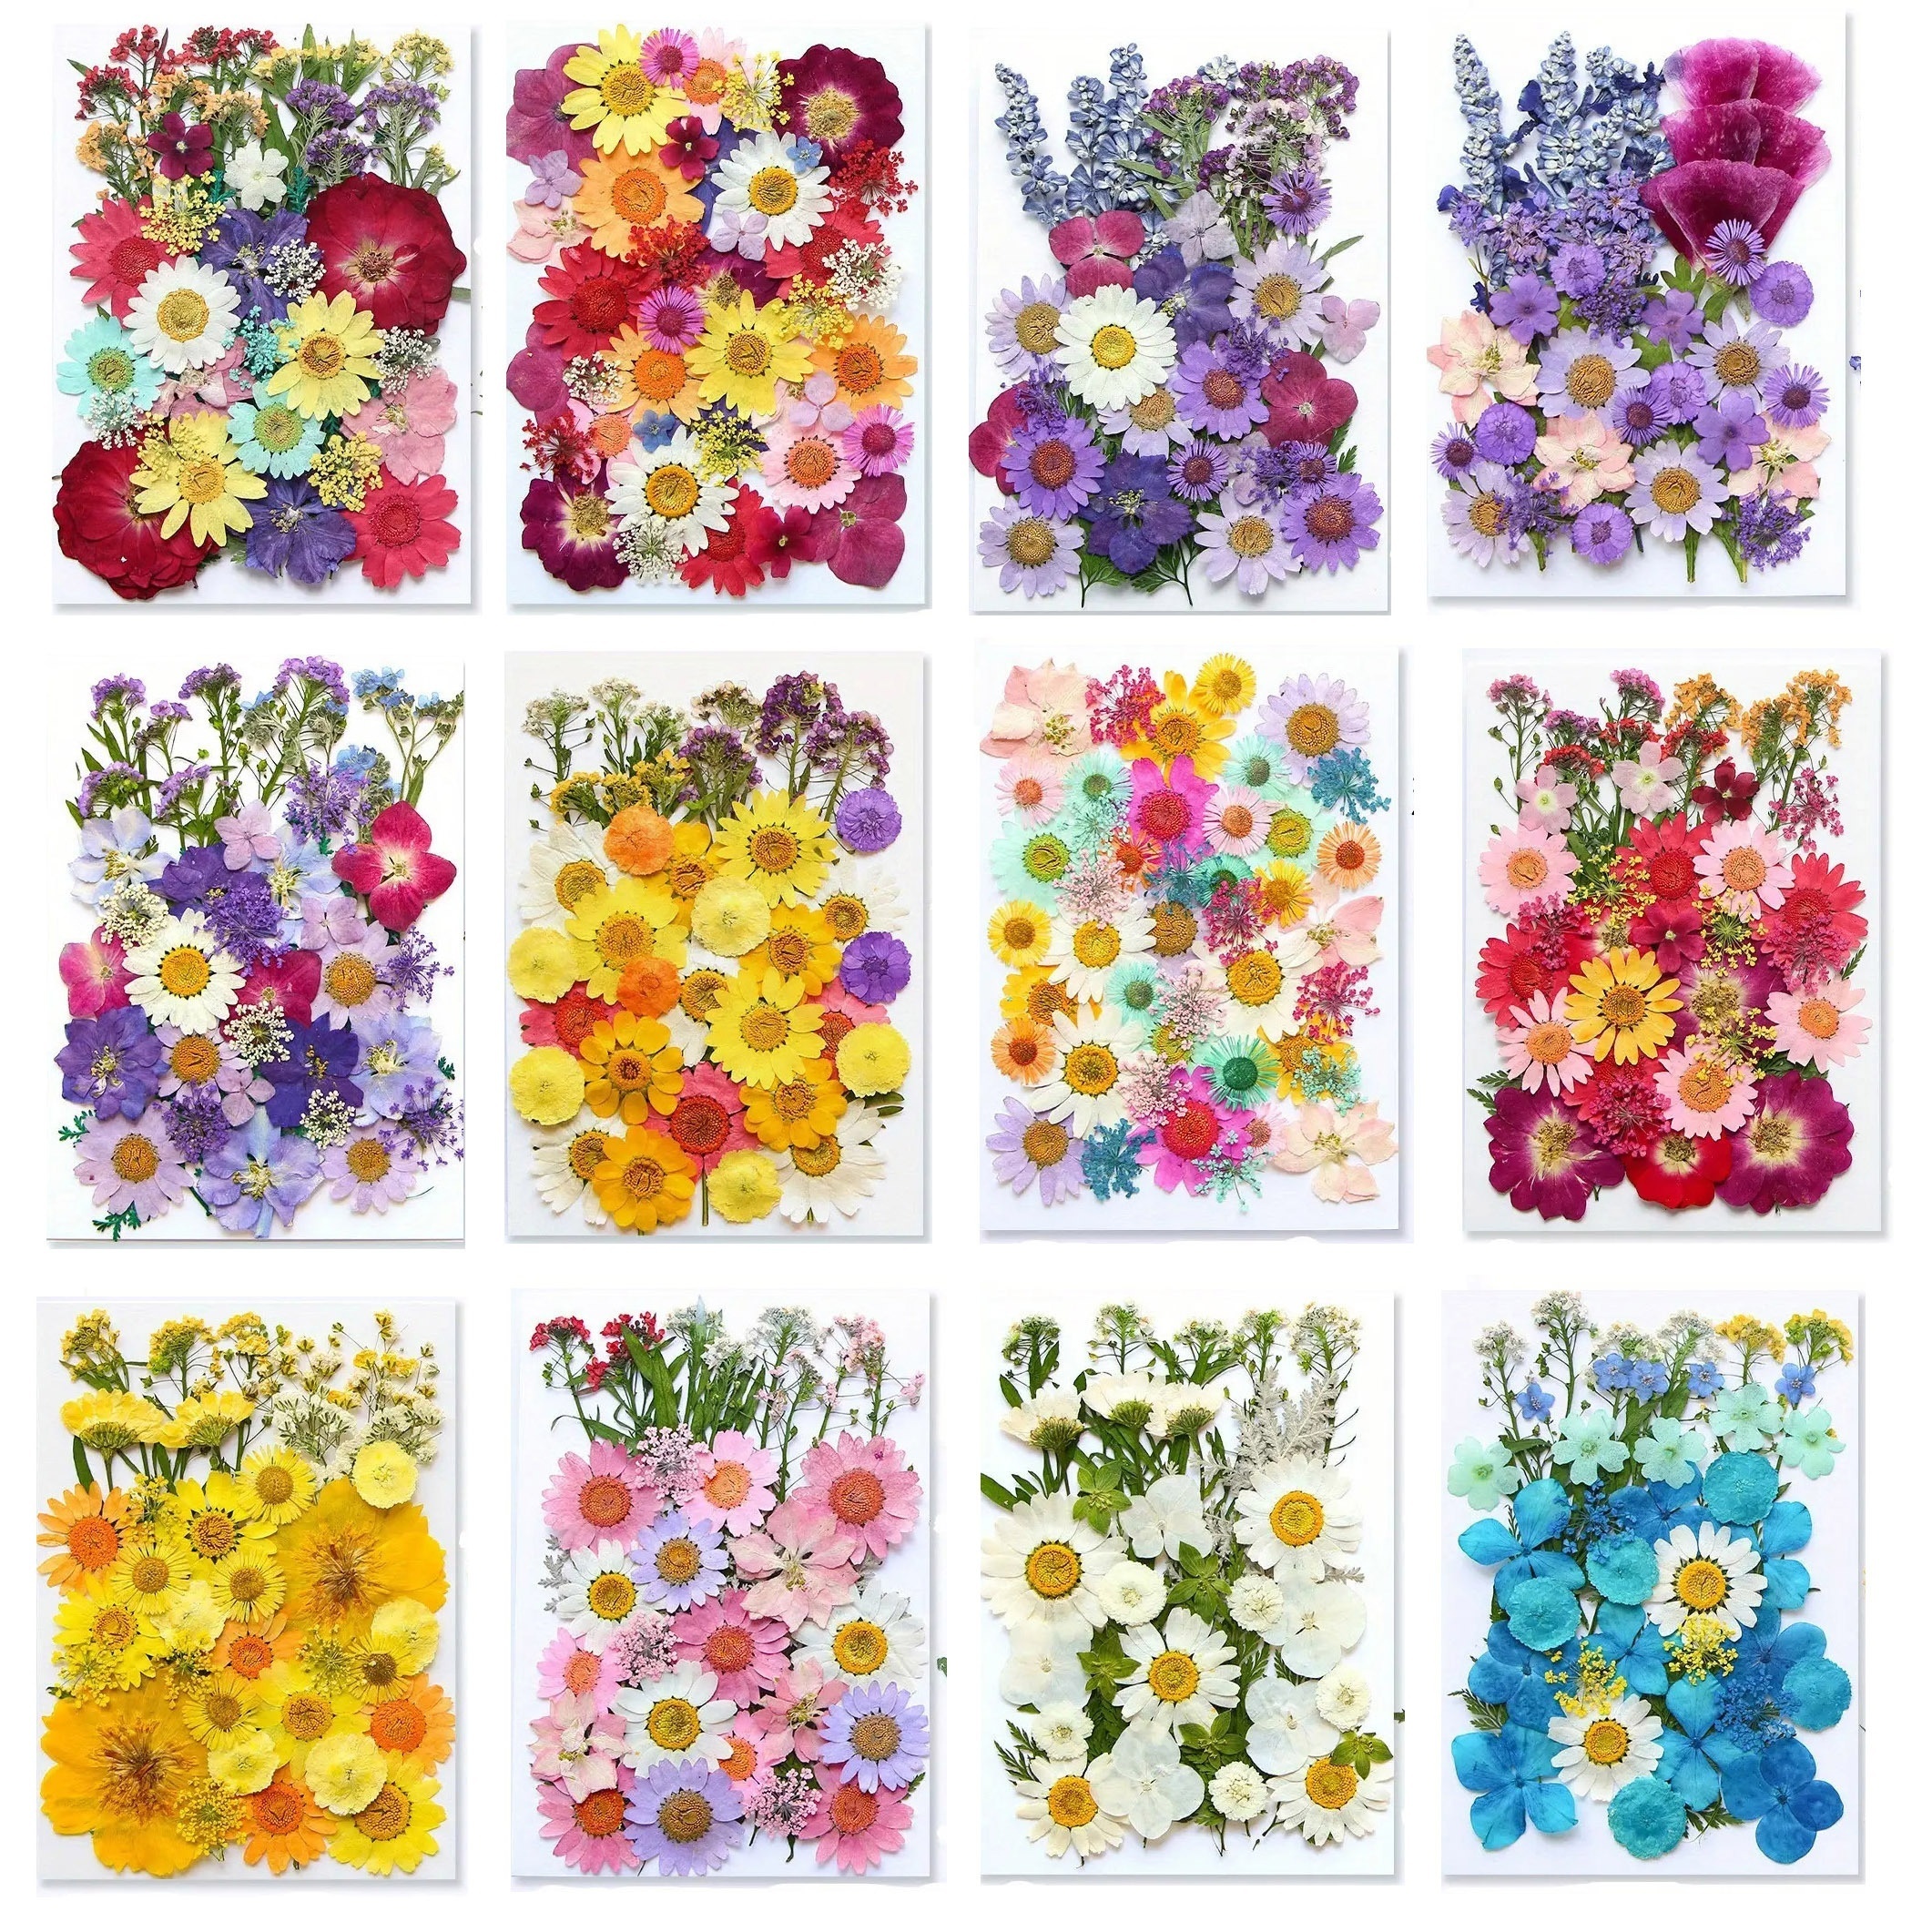 eBoot 72 Pcs Dried Pressed Flowers for Resin Molds Real Pressed Flowers Dry  Leaves Bulk Natural Herbs Kit for Scrapbooking DIY Art Crafts Jewelry